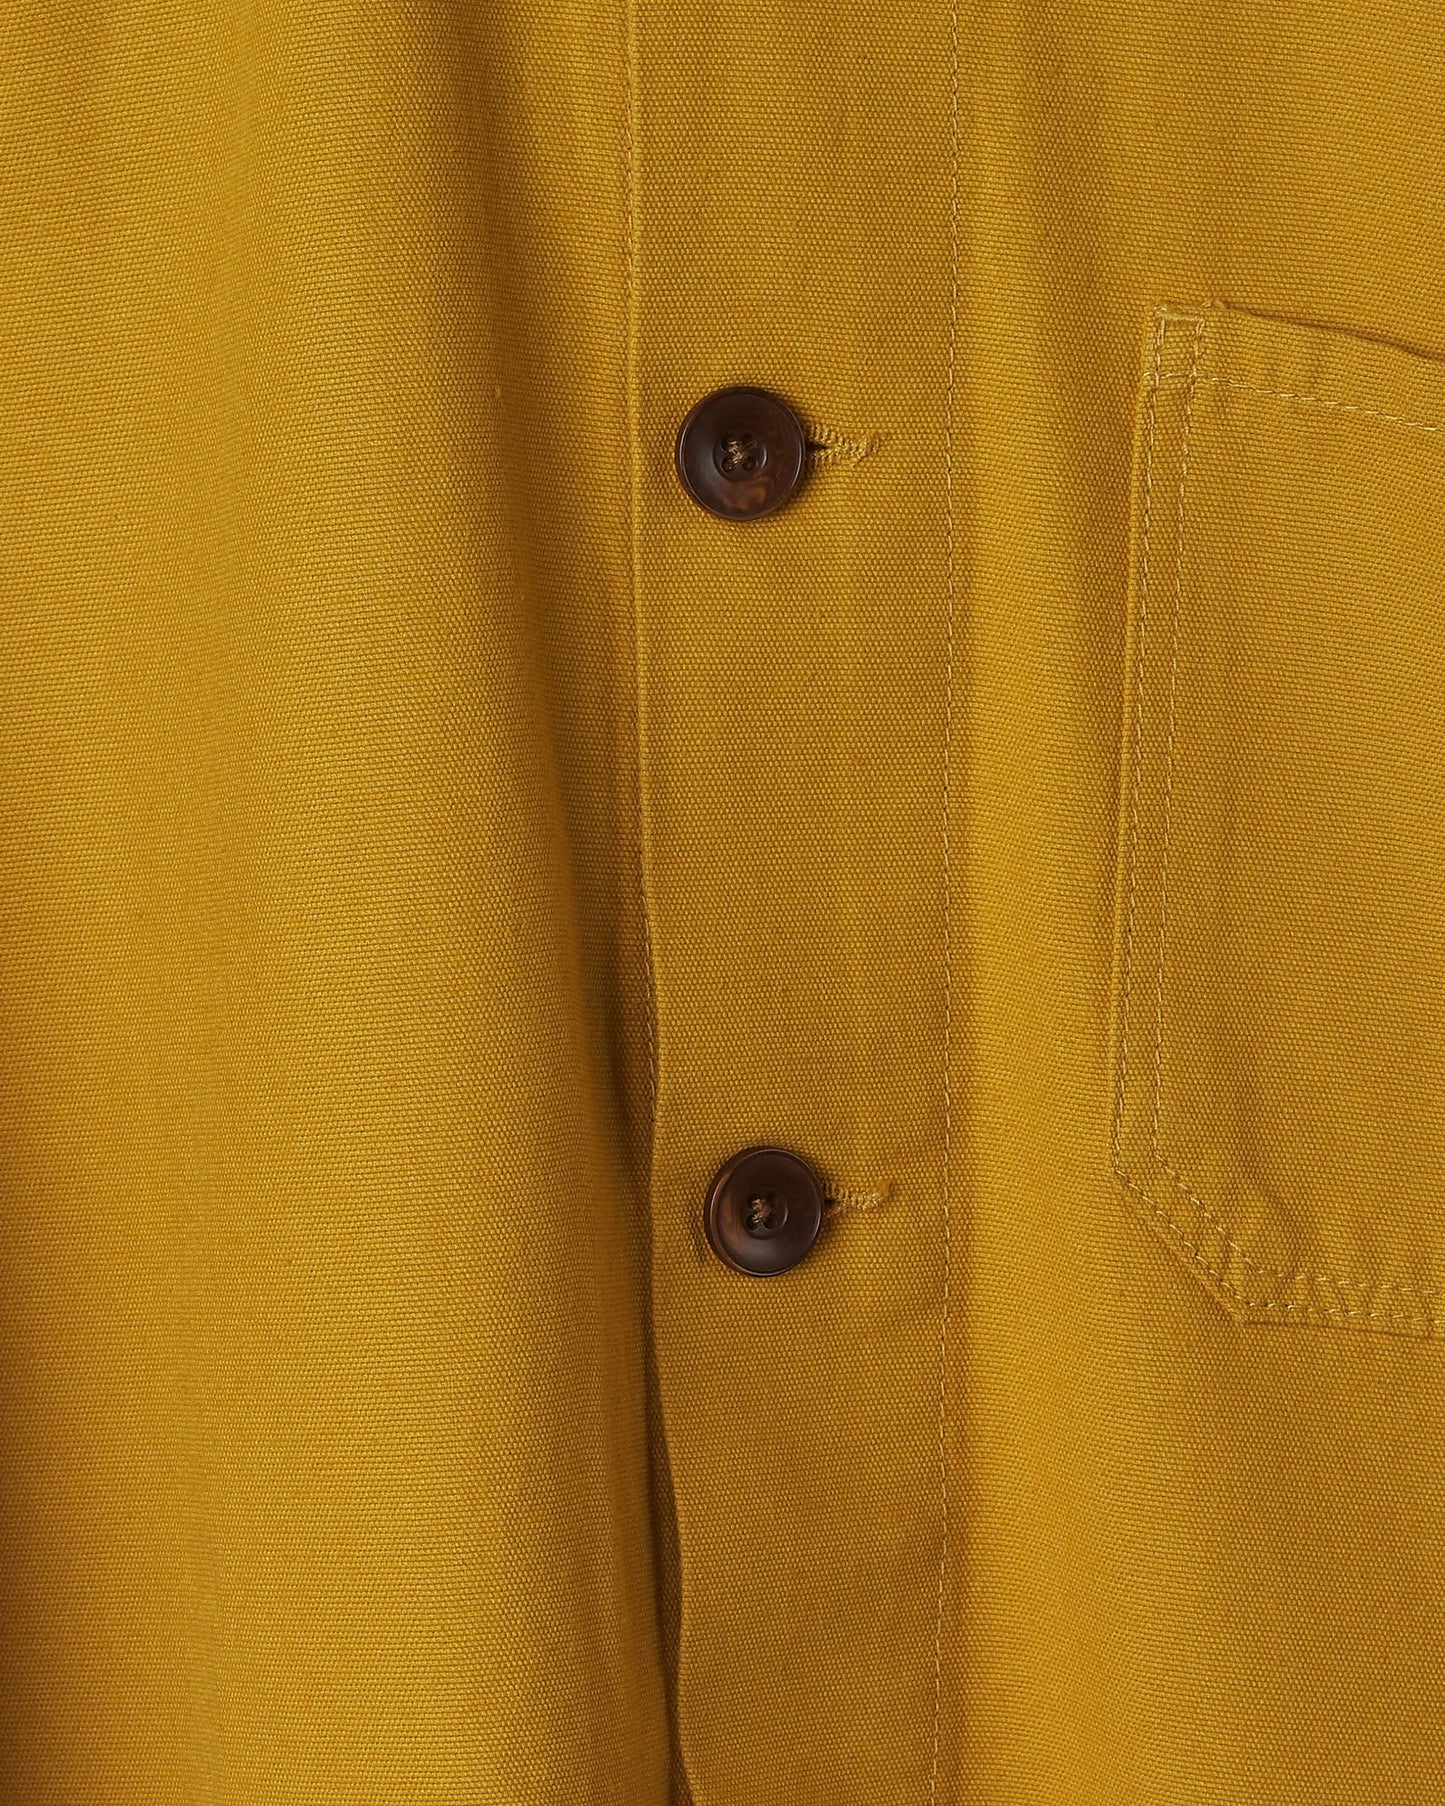 Uskees Buttoned Overshirt #3001 Yellow